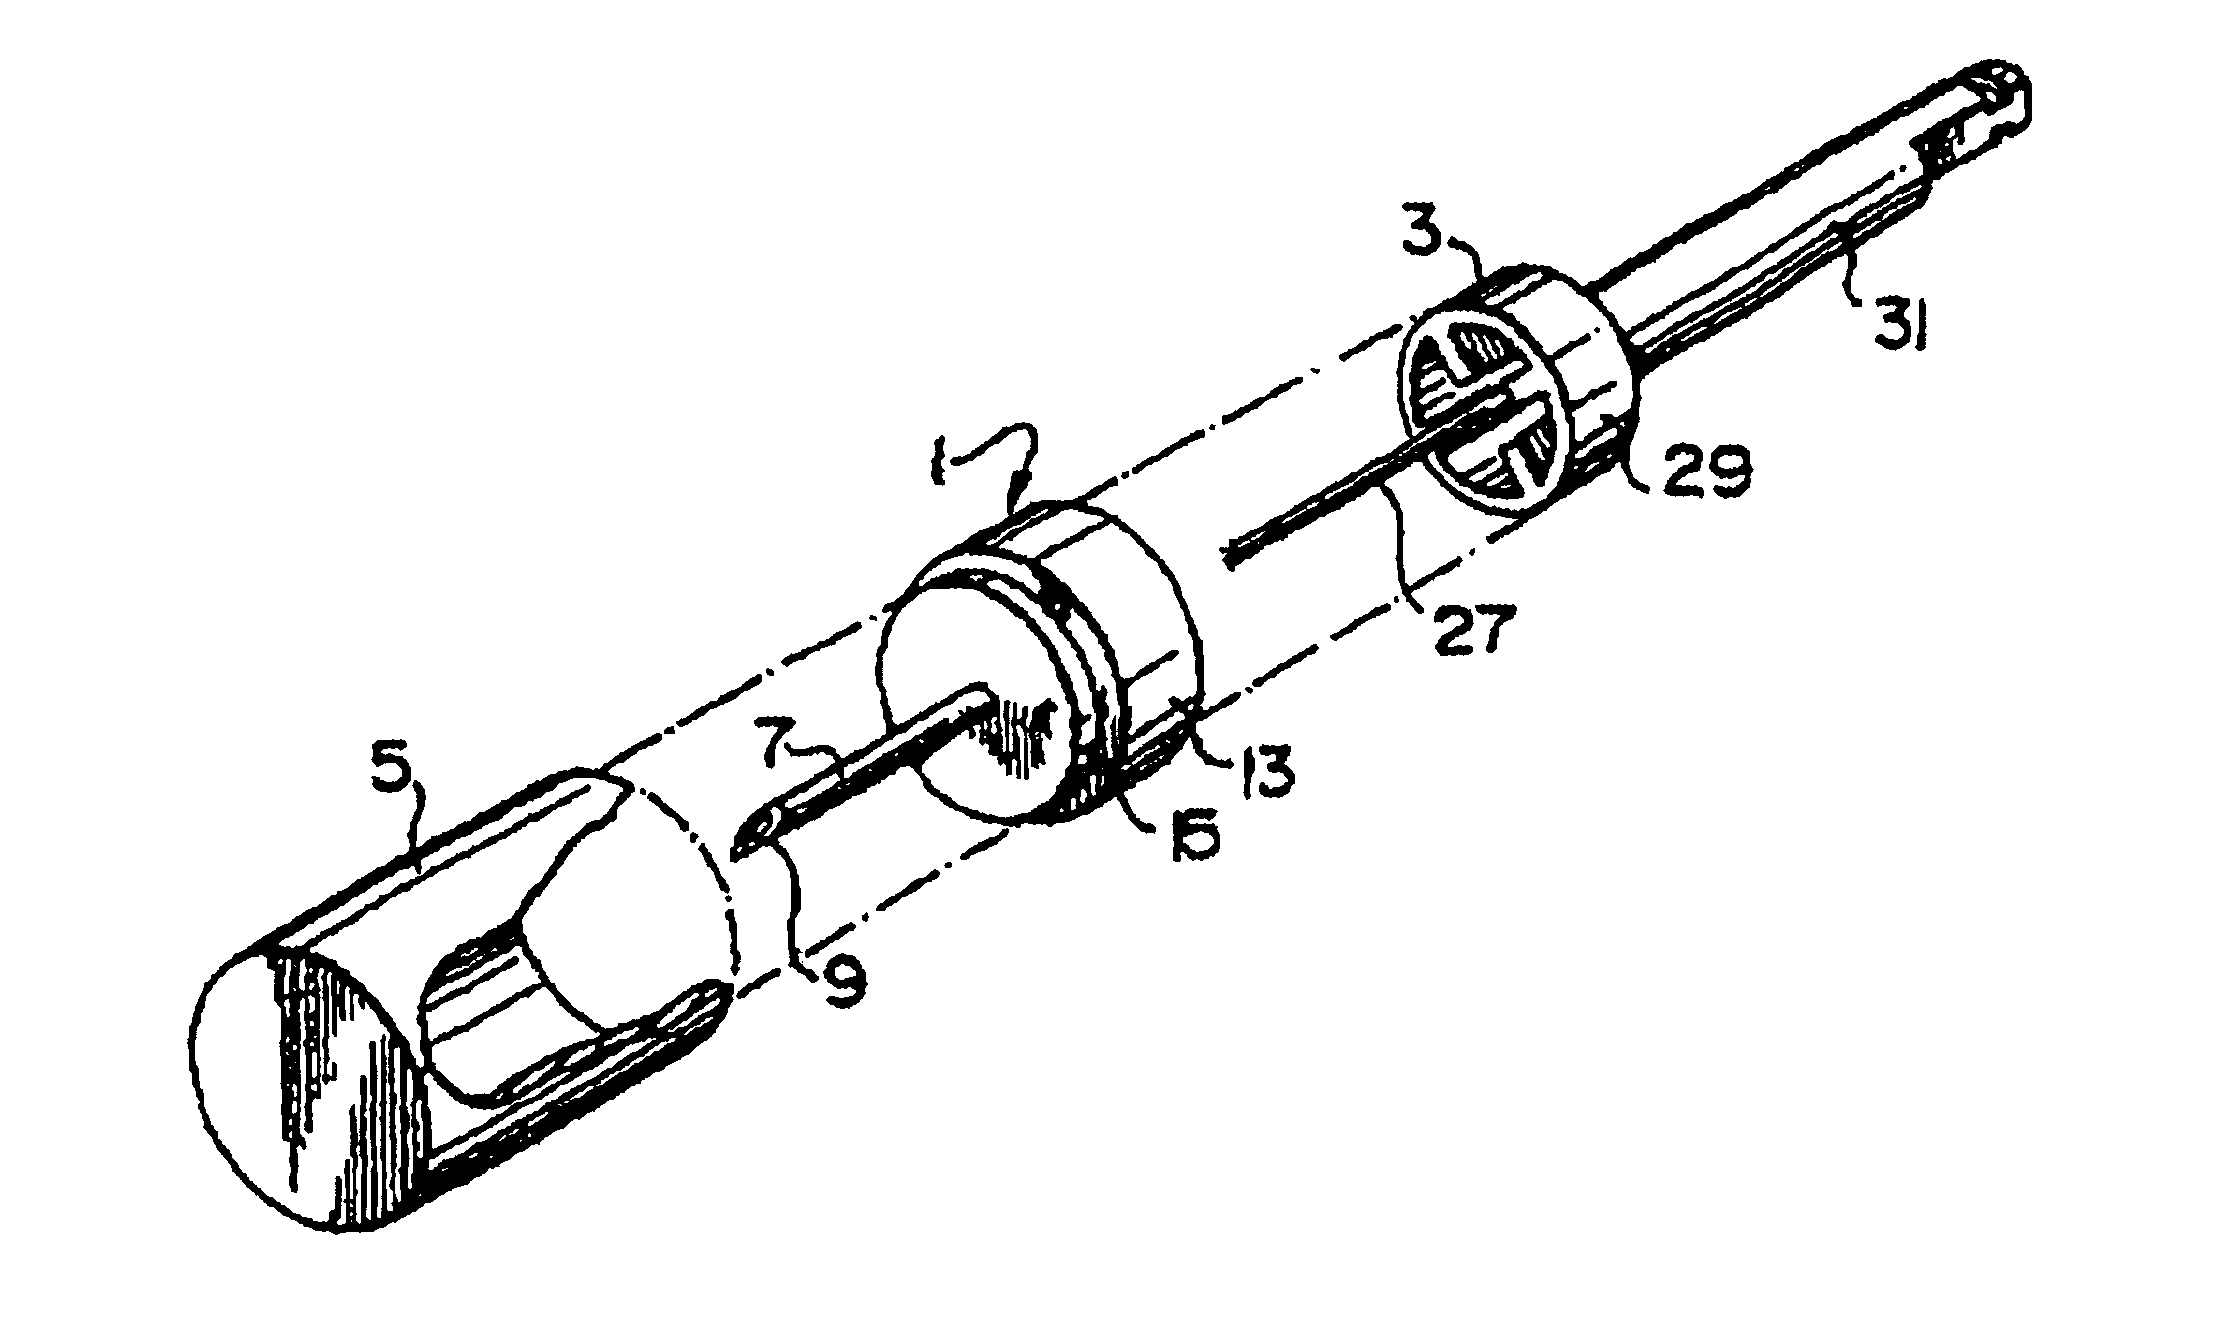 Device for targeted, catheterized delivery of medications